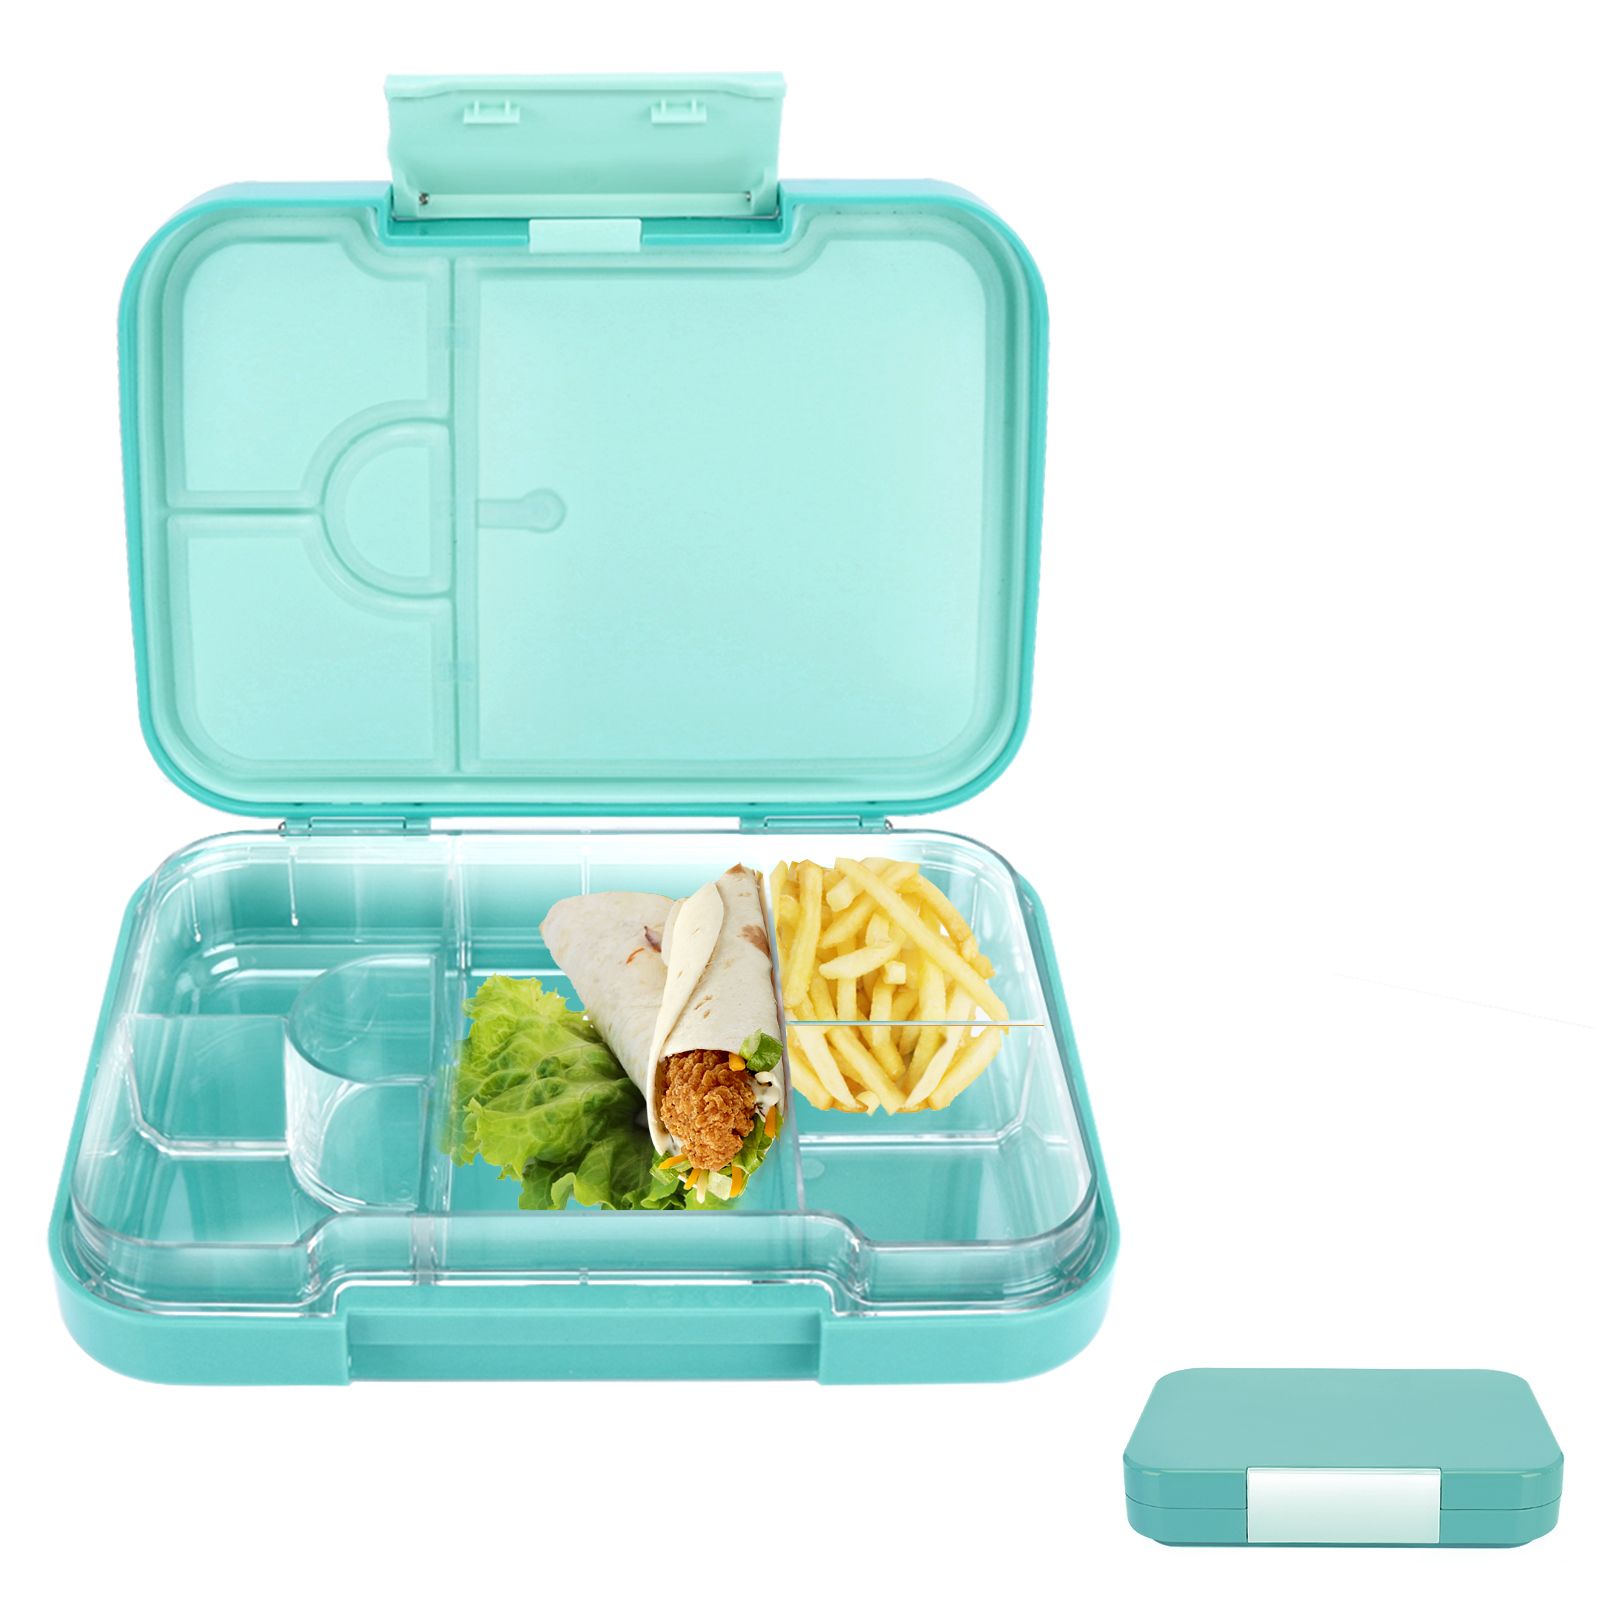 Allnice Bento Box Toddler Lunch Box, Compartment Food Meal Container Box Leakproof, BPA-Free, for... | Walmart (US)